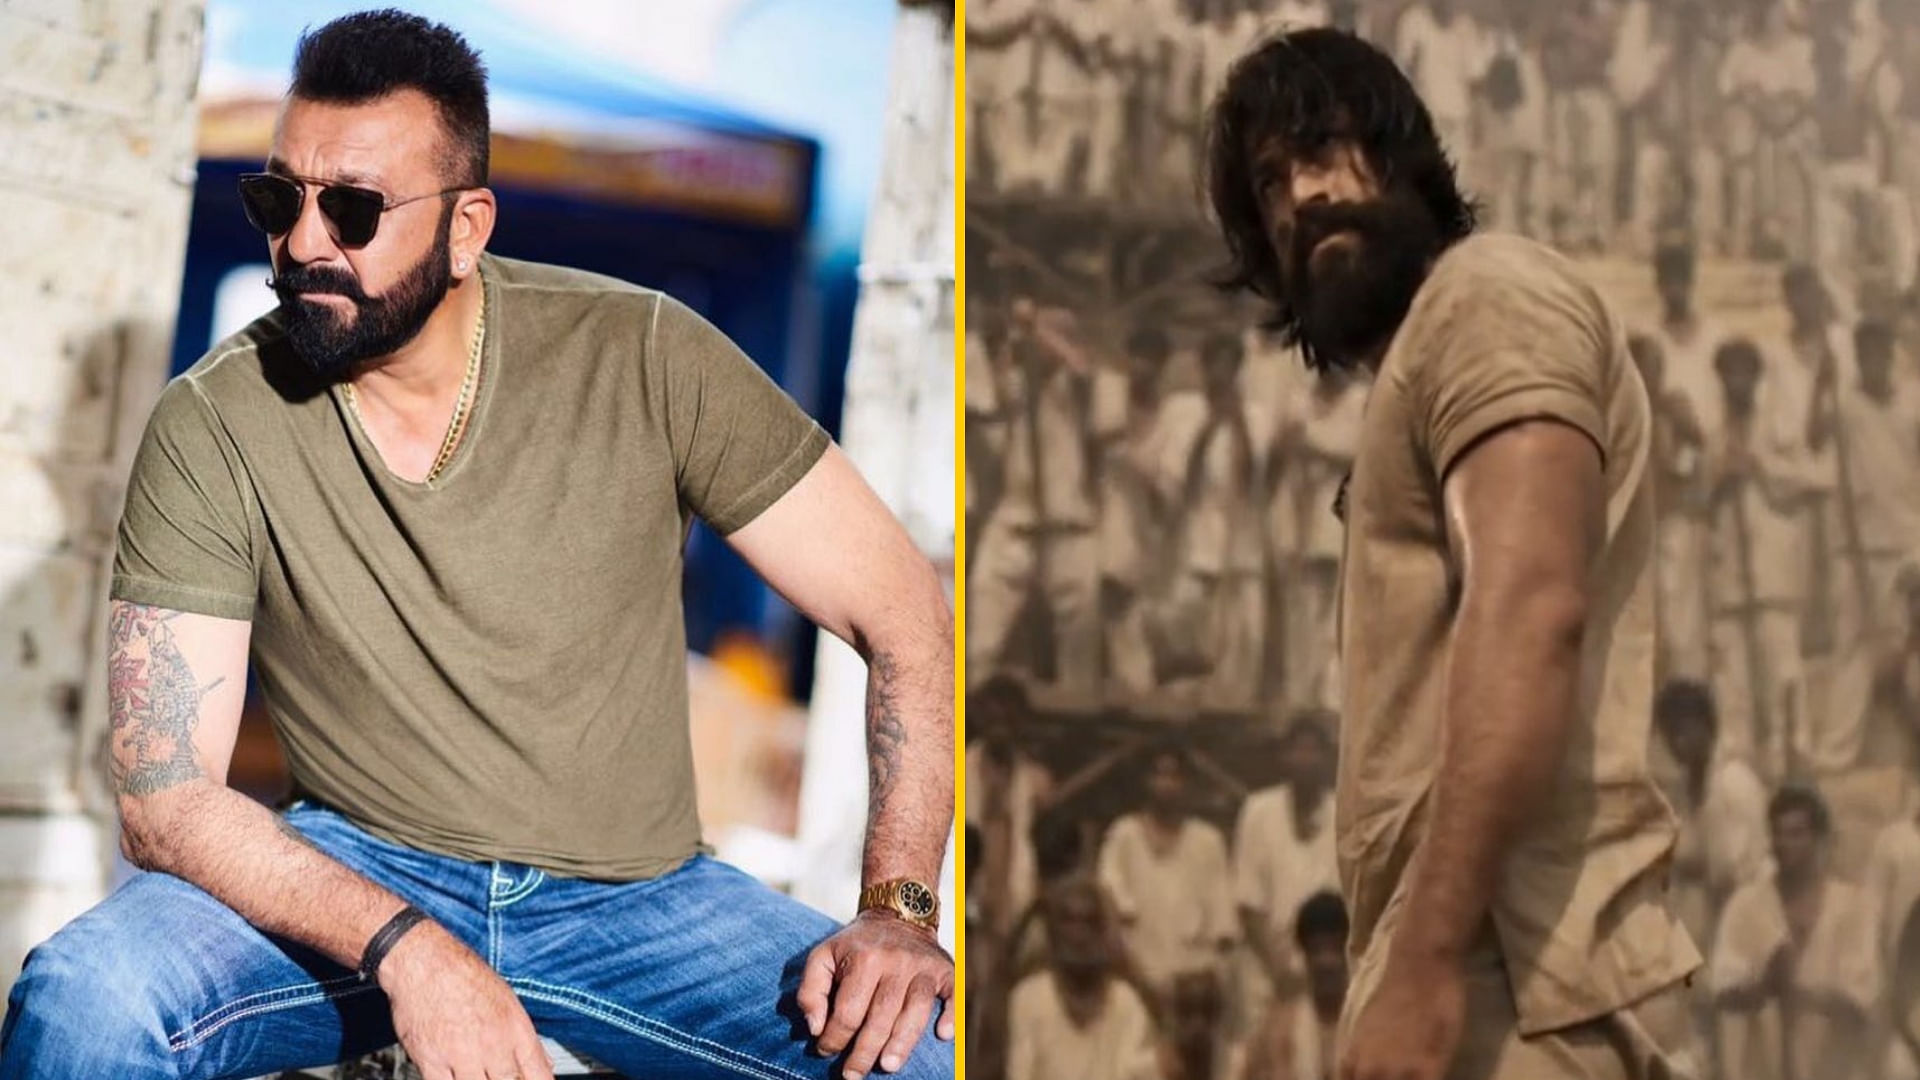 Sanjay Dutt has been approached for <i>KGF: Chapter 2</i>, says actor Yash.